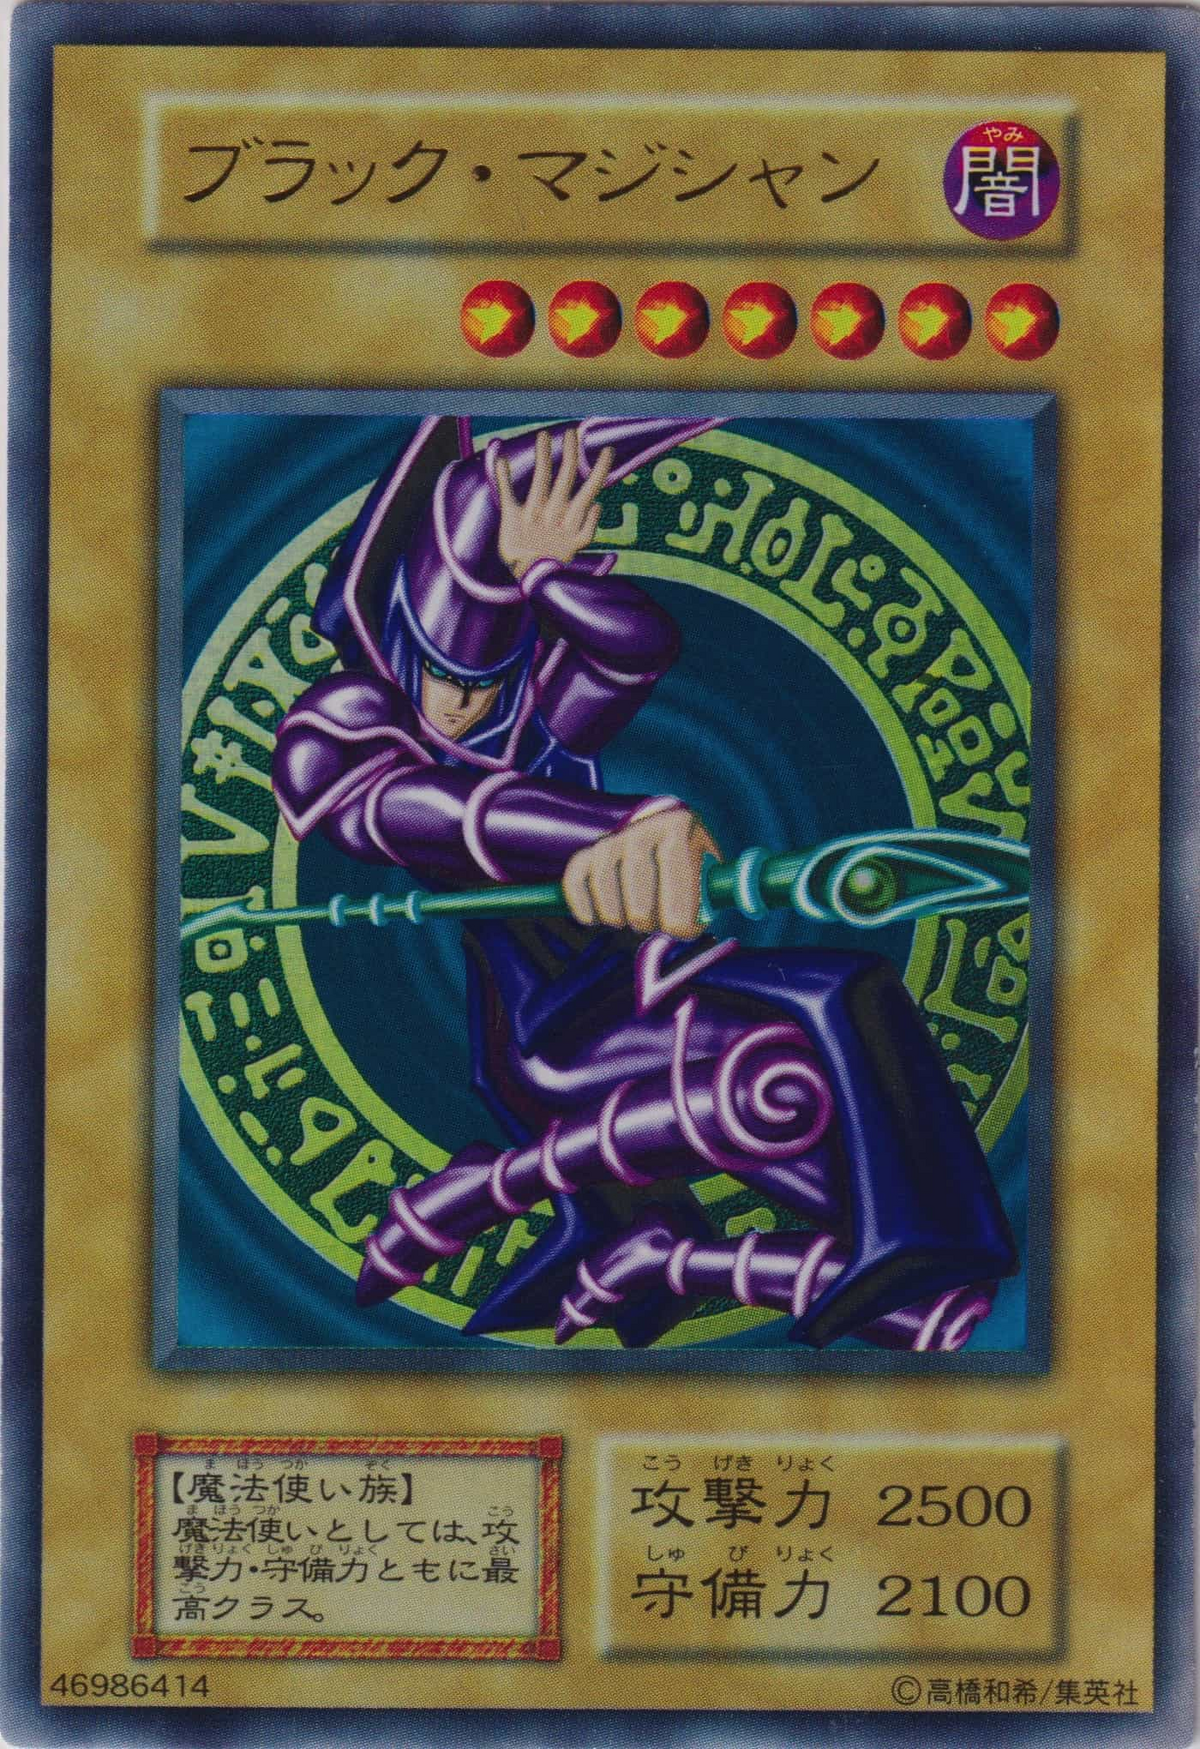 Events  Yu-Gi-Oh! OCG Duel Monsters Card Game Asia